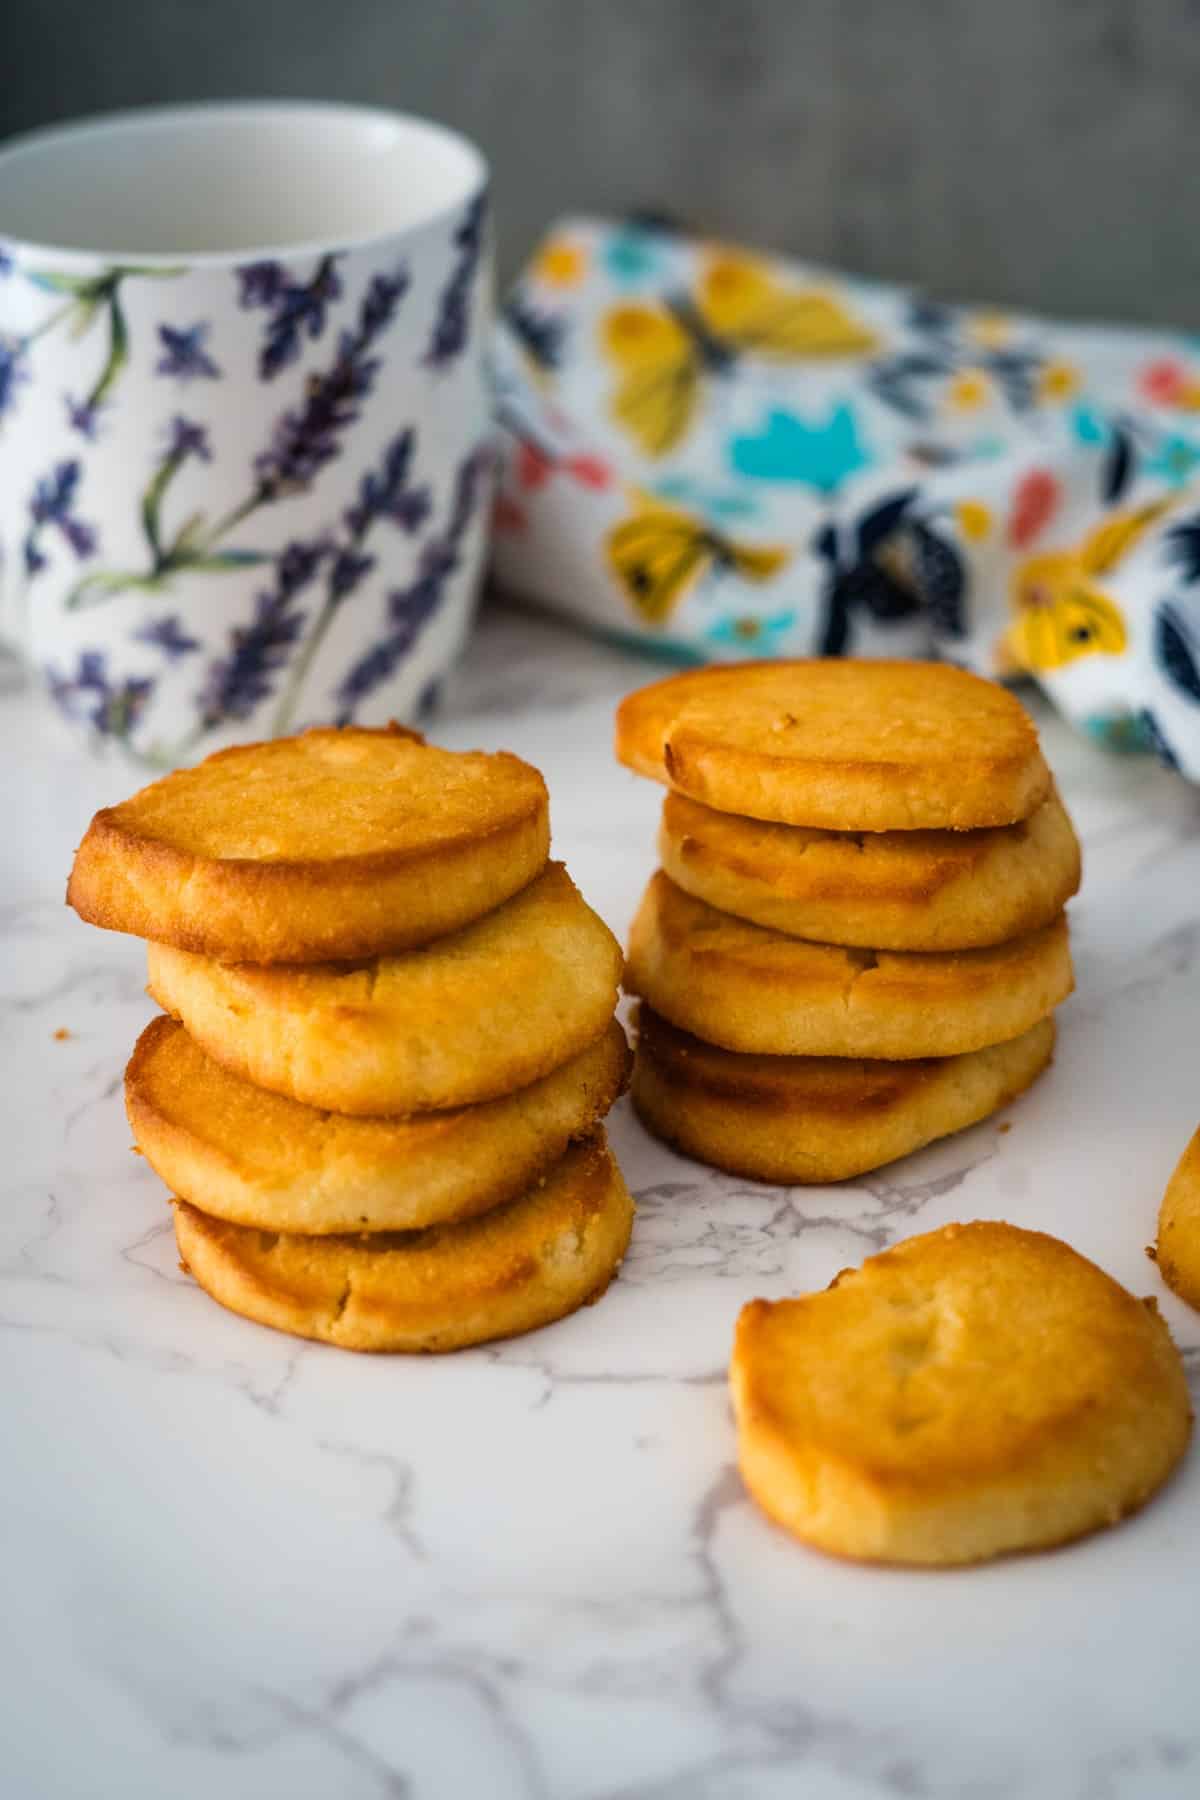 Stack of golden brown keto cream cheese cookies on a marble surface, with a floral mug and cloth in the background.